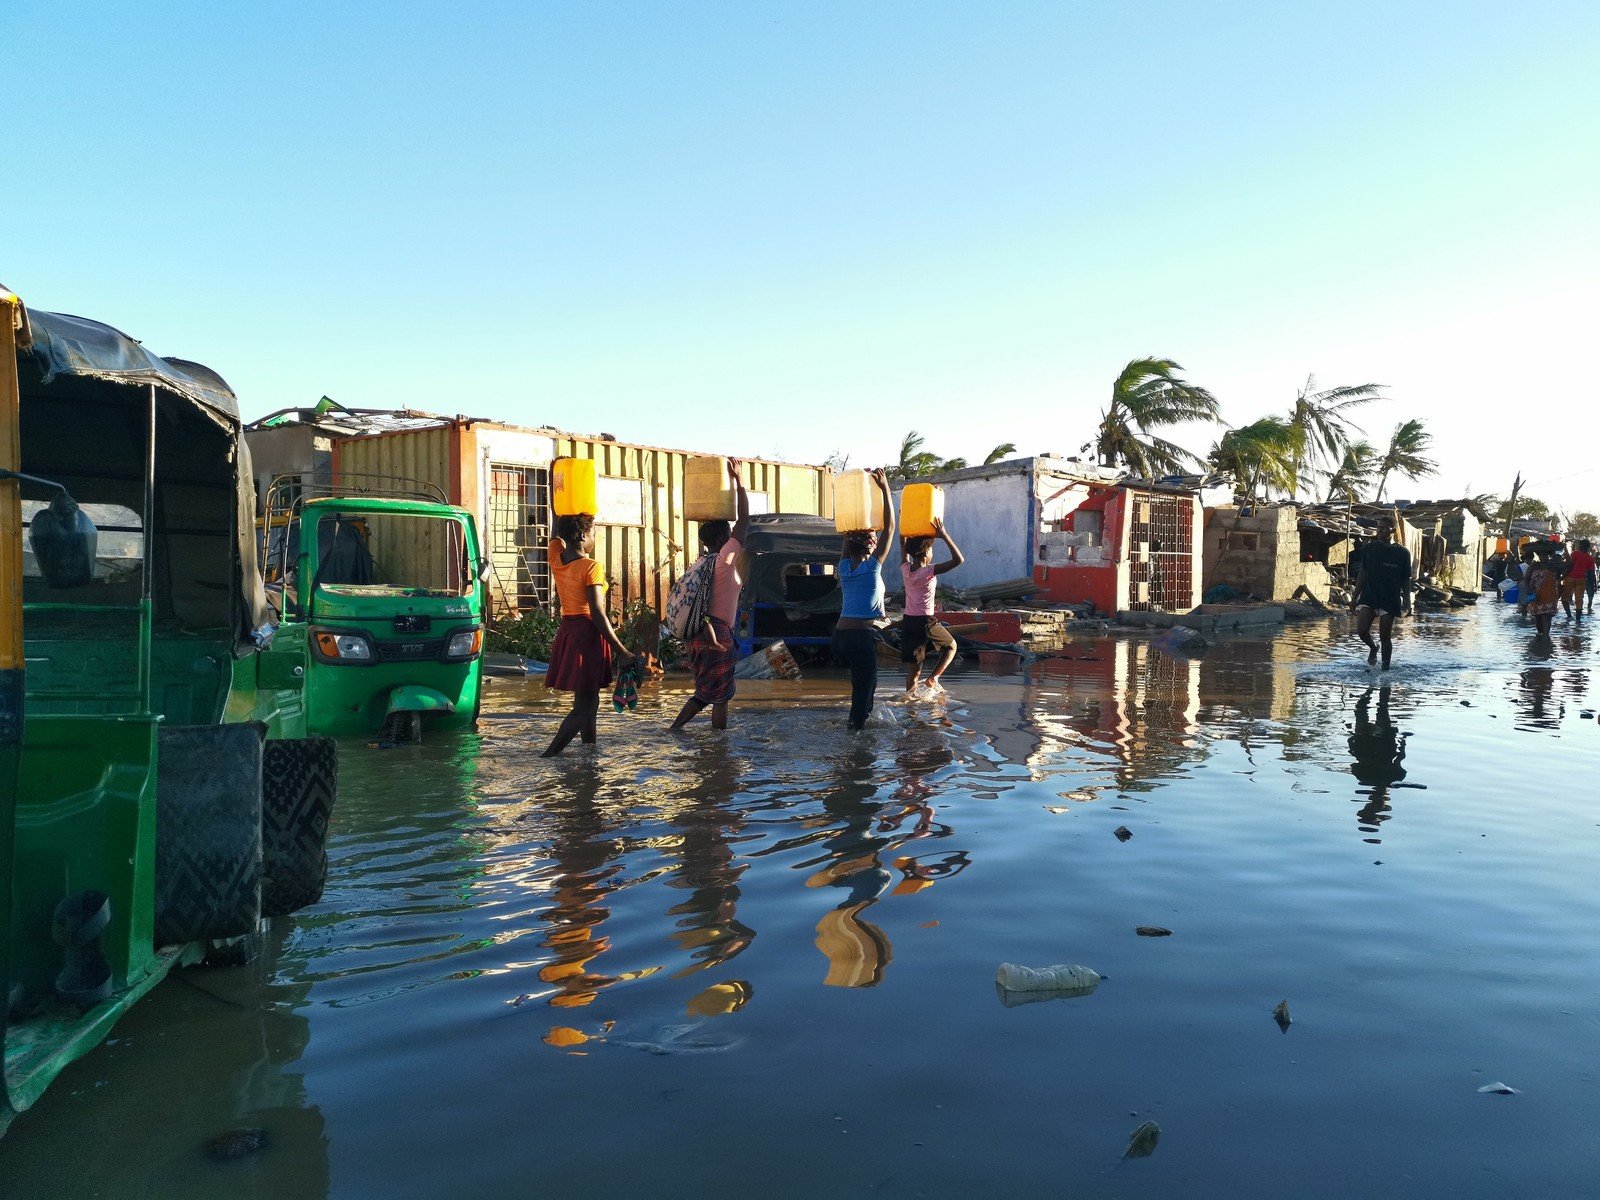 Survivors of Cyclone Idai in Beira, Mozambique, face water and electricity shortages and are at risk of waterbourne diseases carried in contaminated flood water. (Photo: Sergio Zimba/Oxfam)